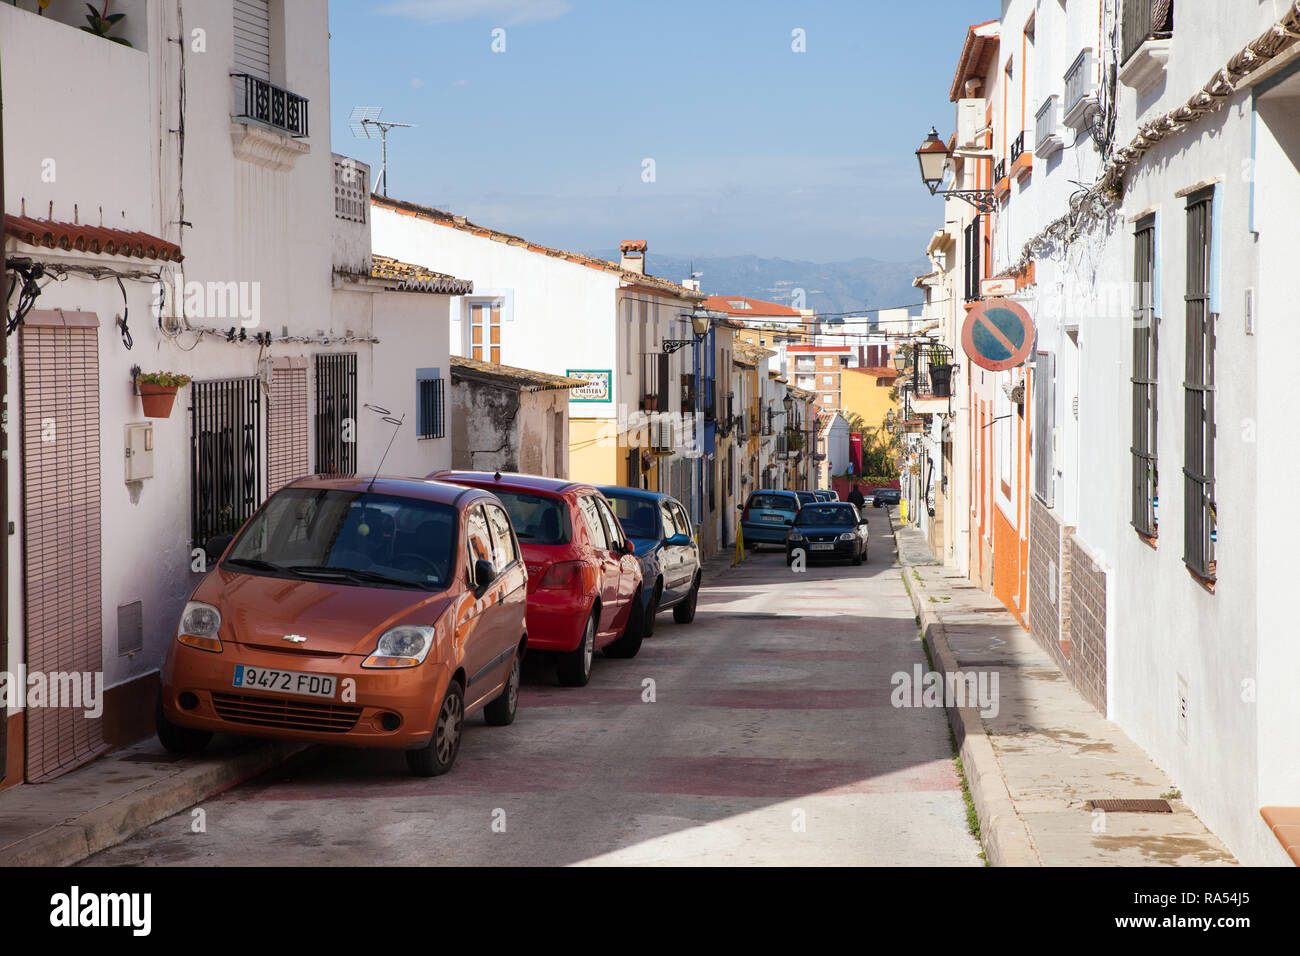 April 30, 2013 - Denia, Spain: view to the cosy streets of the small Denia town Stock Photo